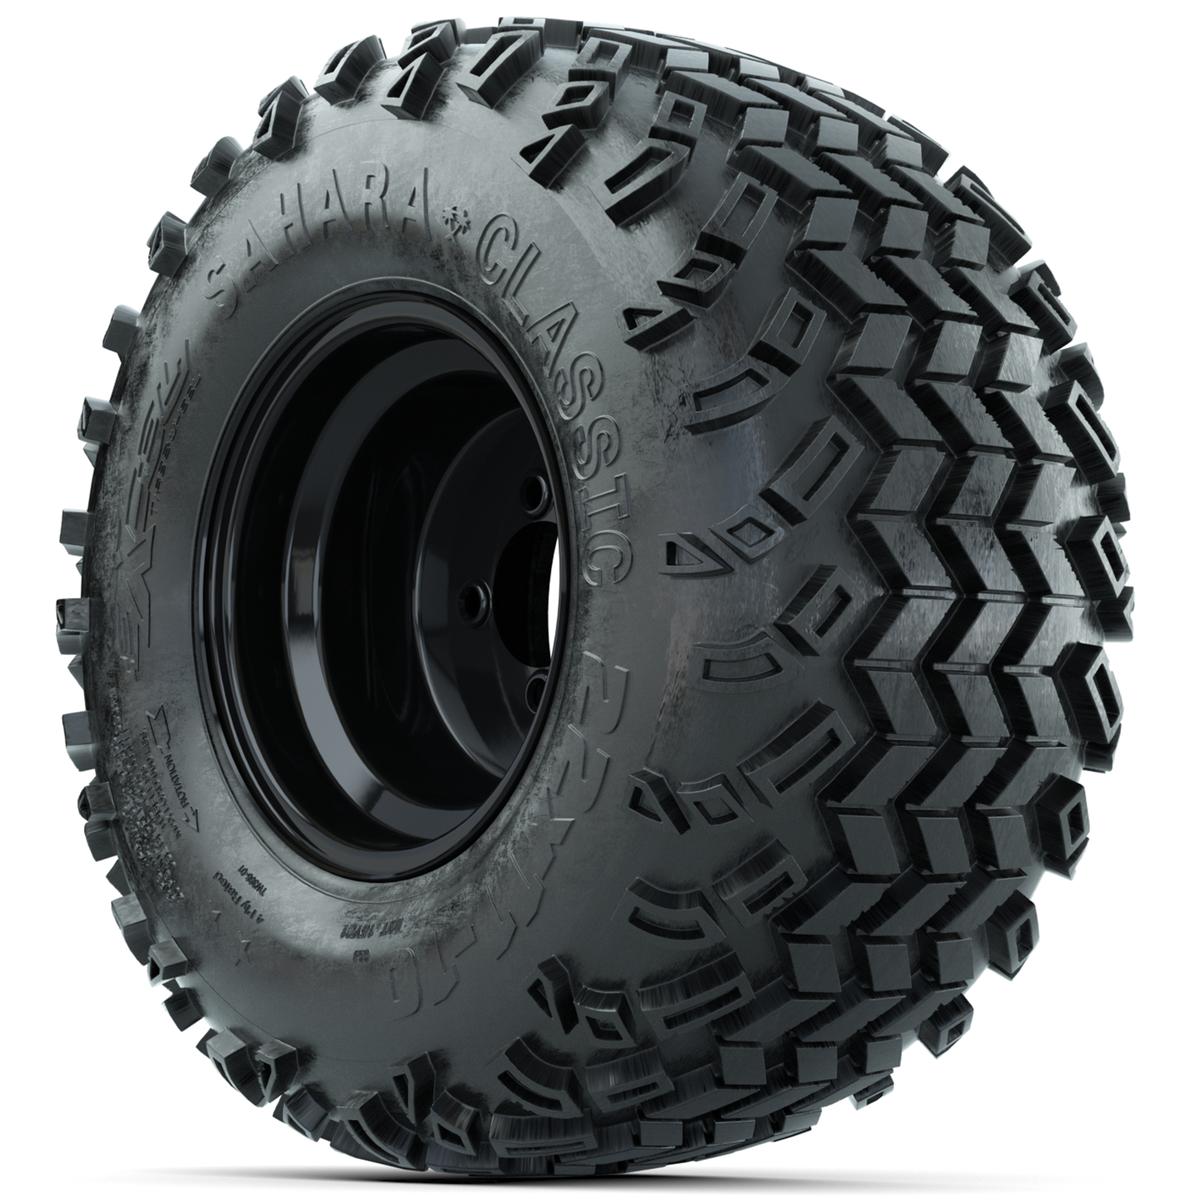 Set of (4) 10 in Black Steel Offset Wheels with 22x11-10 Sahara Classic All Terrain Tires